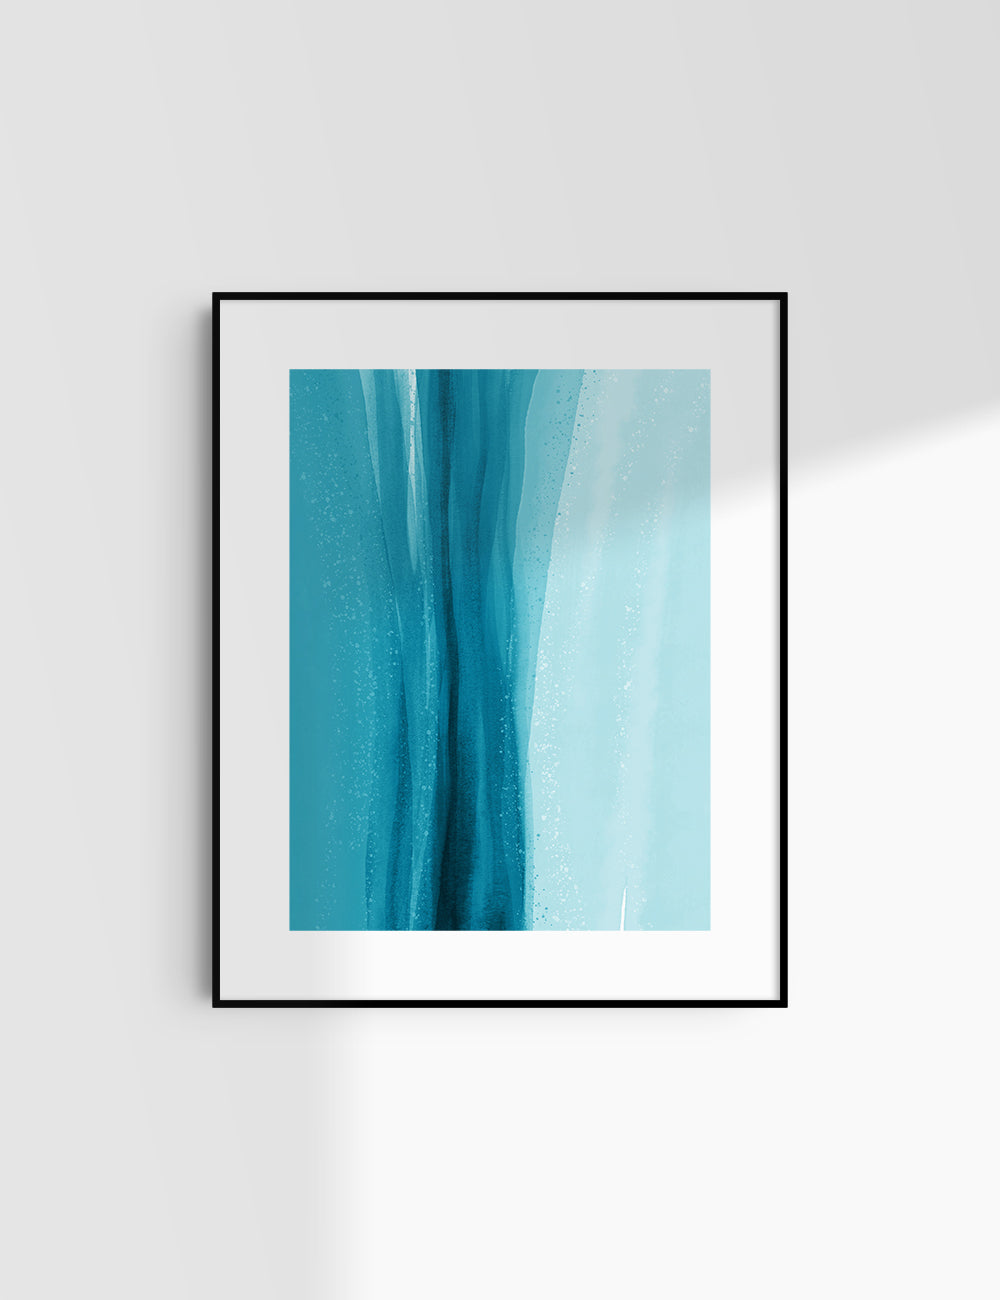 WATERCOLOR ABSTRACT. Bright Blue Aesthetic. Abstract Watercolor Painting. Printable Wall Art. - PAPER MOON Art & Design